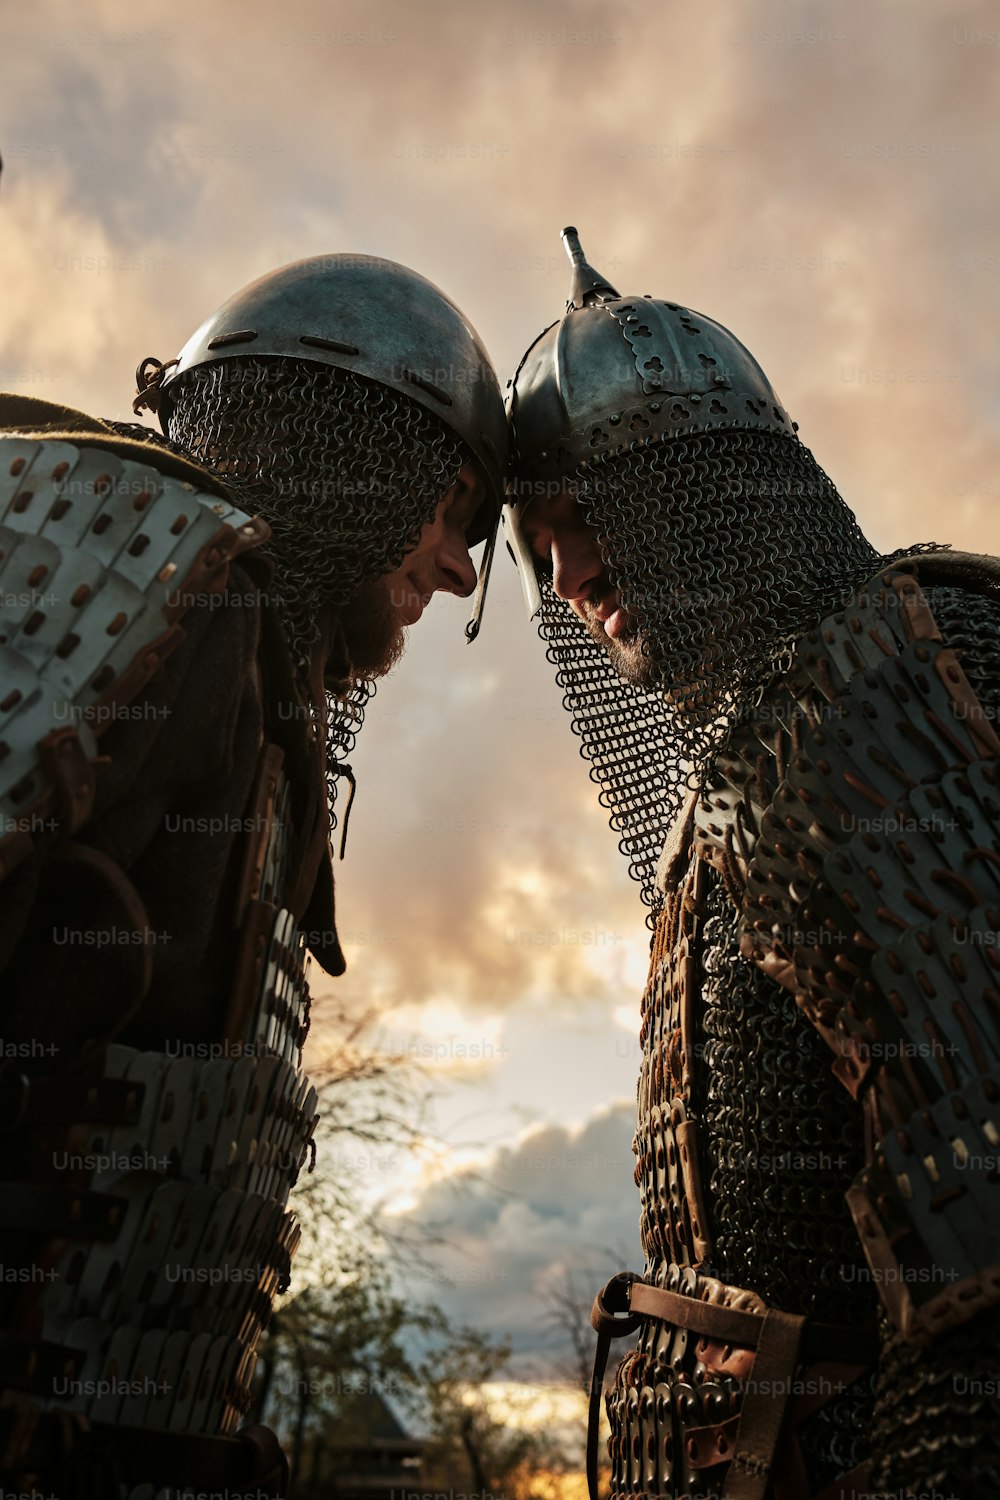 a couple of men in armor standing next to each other